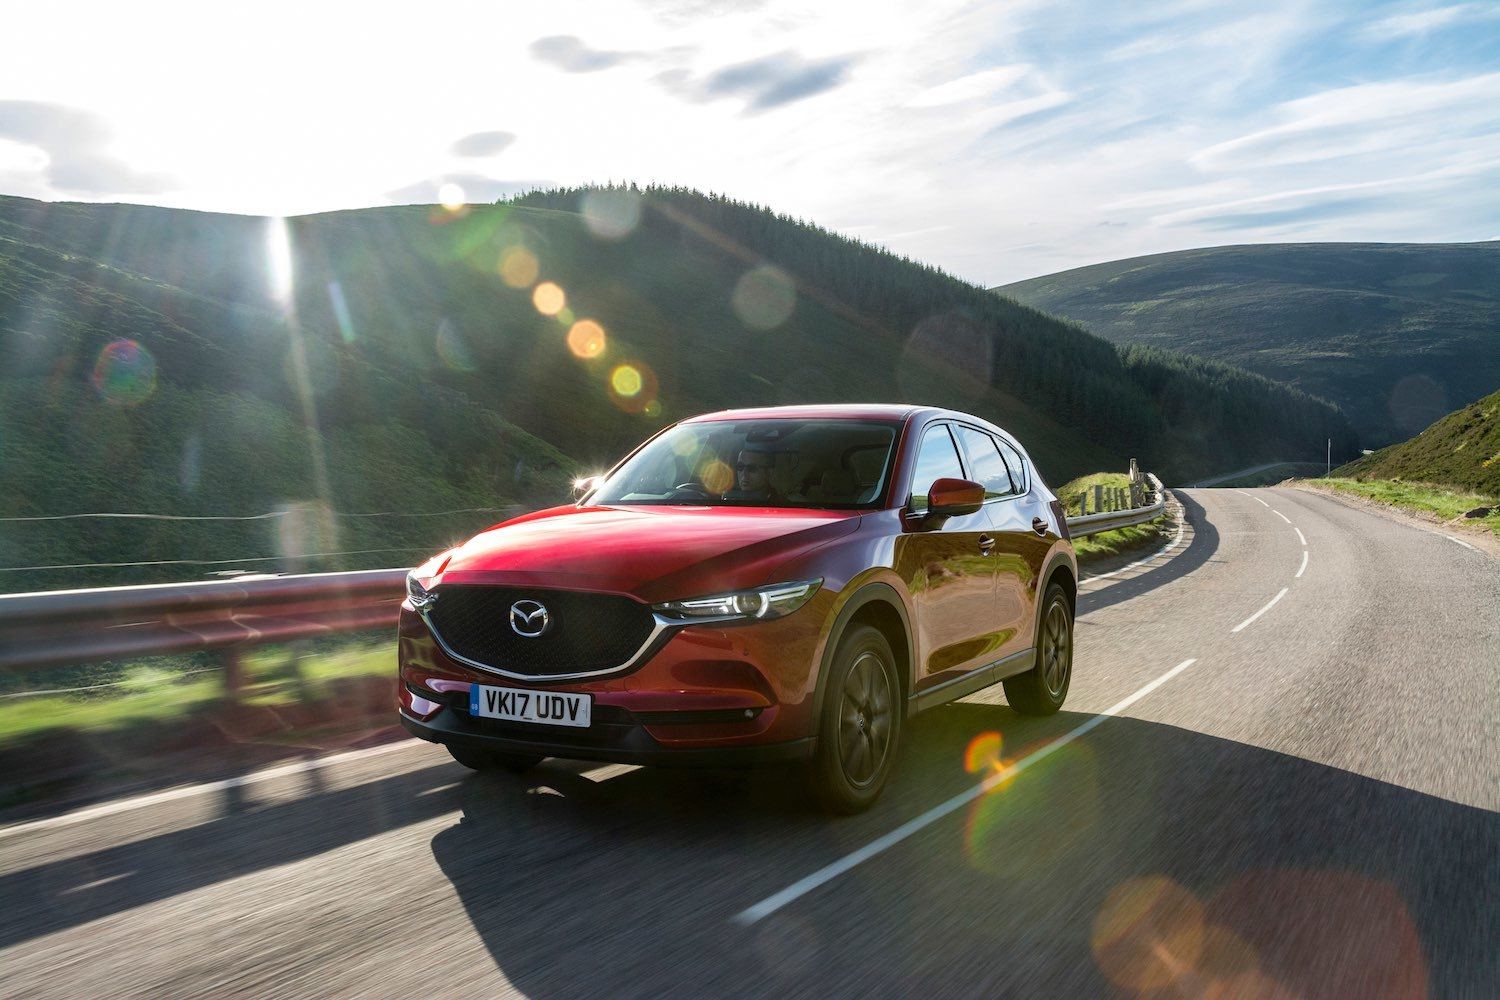 Tom Scanlan reviews the all new Mazda CX-5 in the Cairngorms Scotland for drive 17